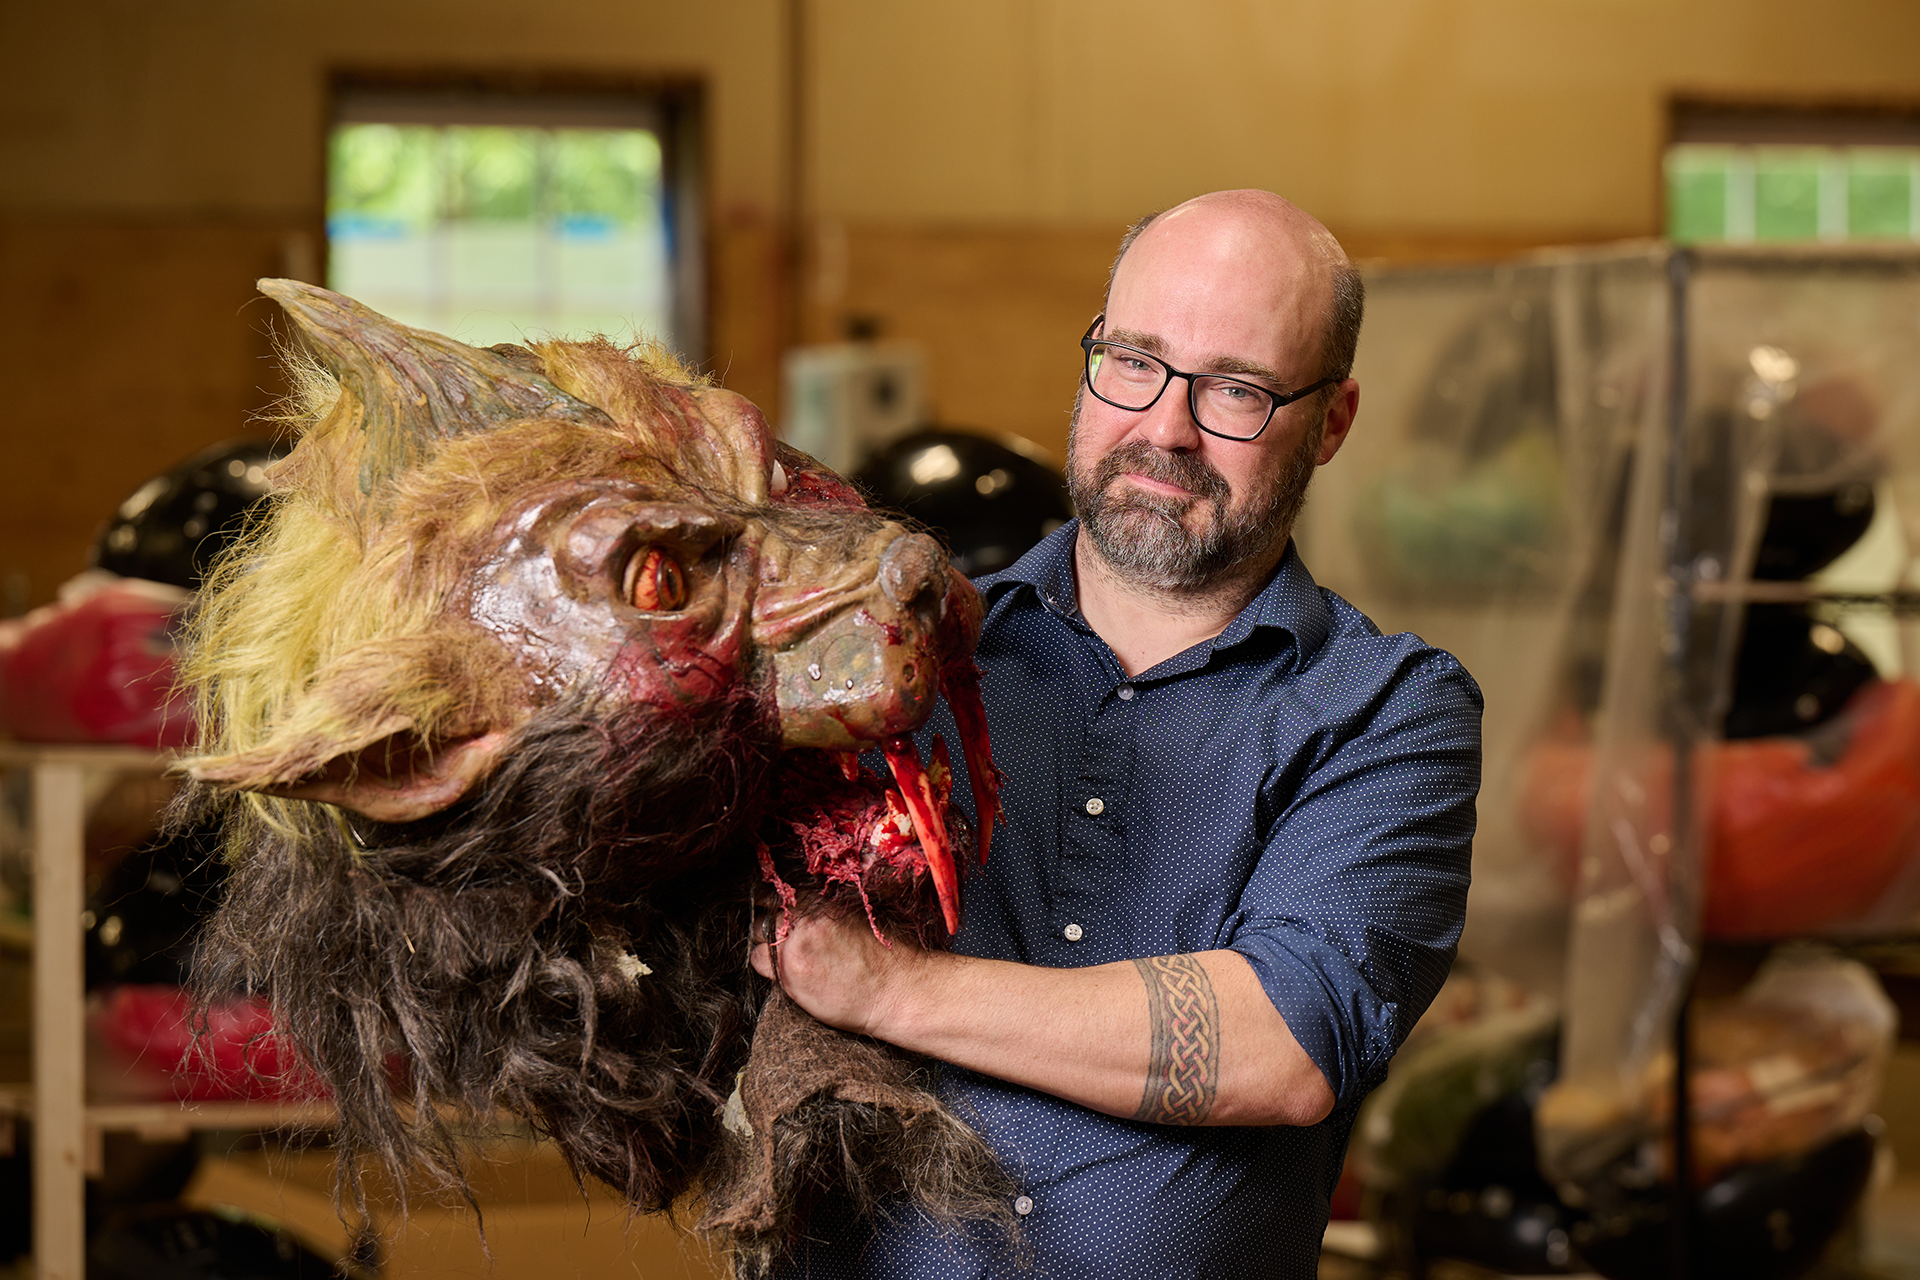 Saunders proudly holds a life-like and bloody chupacabra puppet head.